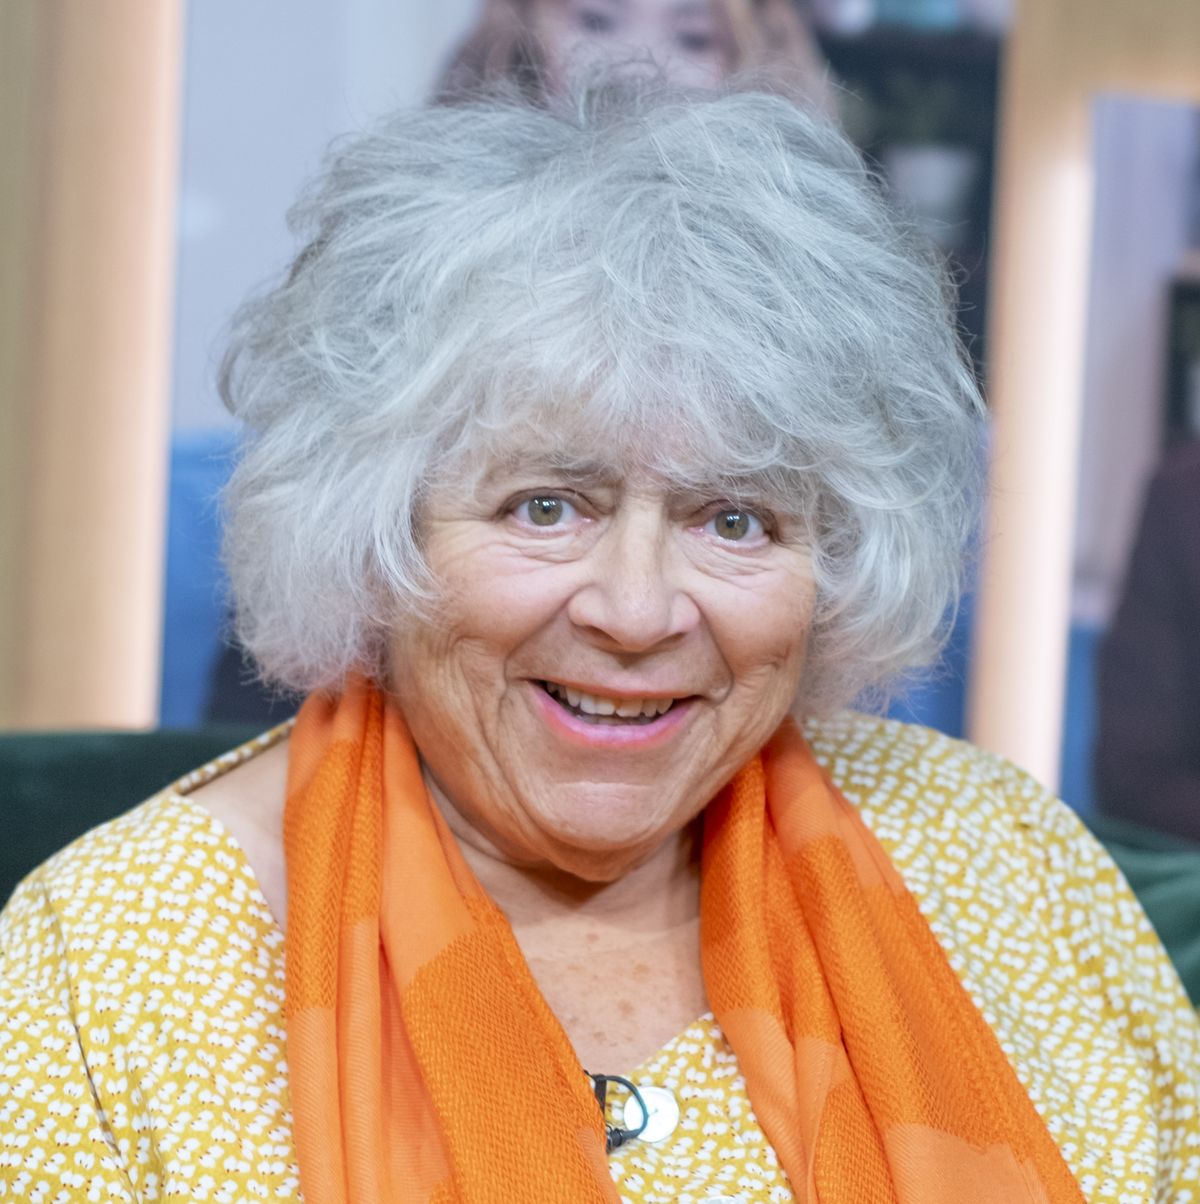 Miriam Margolyes to star as 'the Meep' in Doctor Who 60th-anniversary  series, Doctor Who